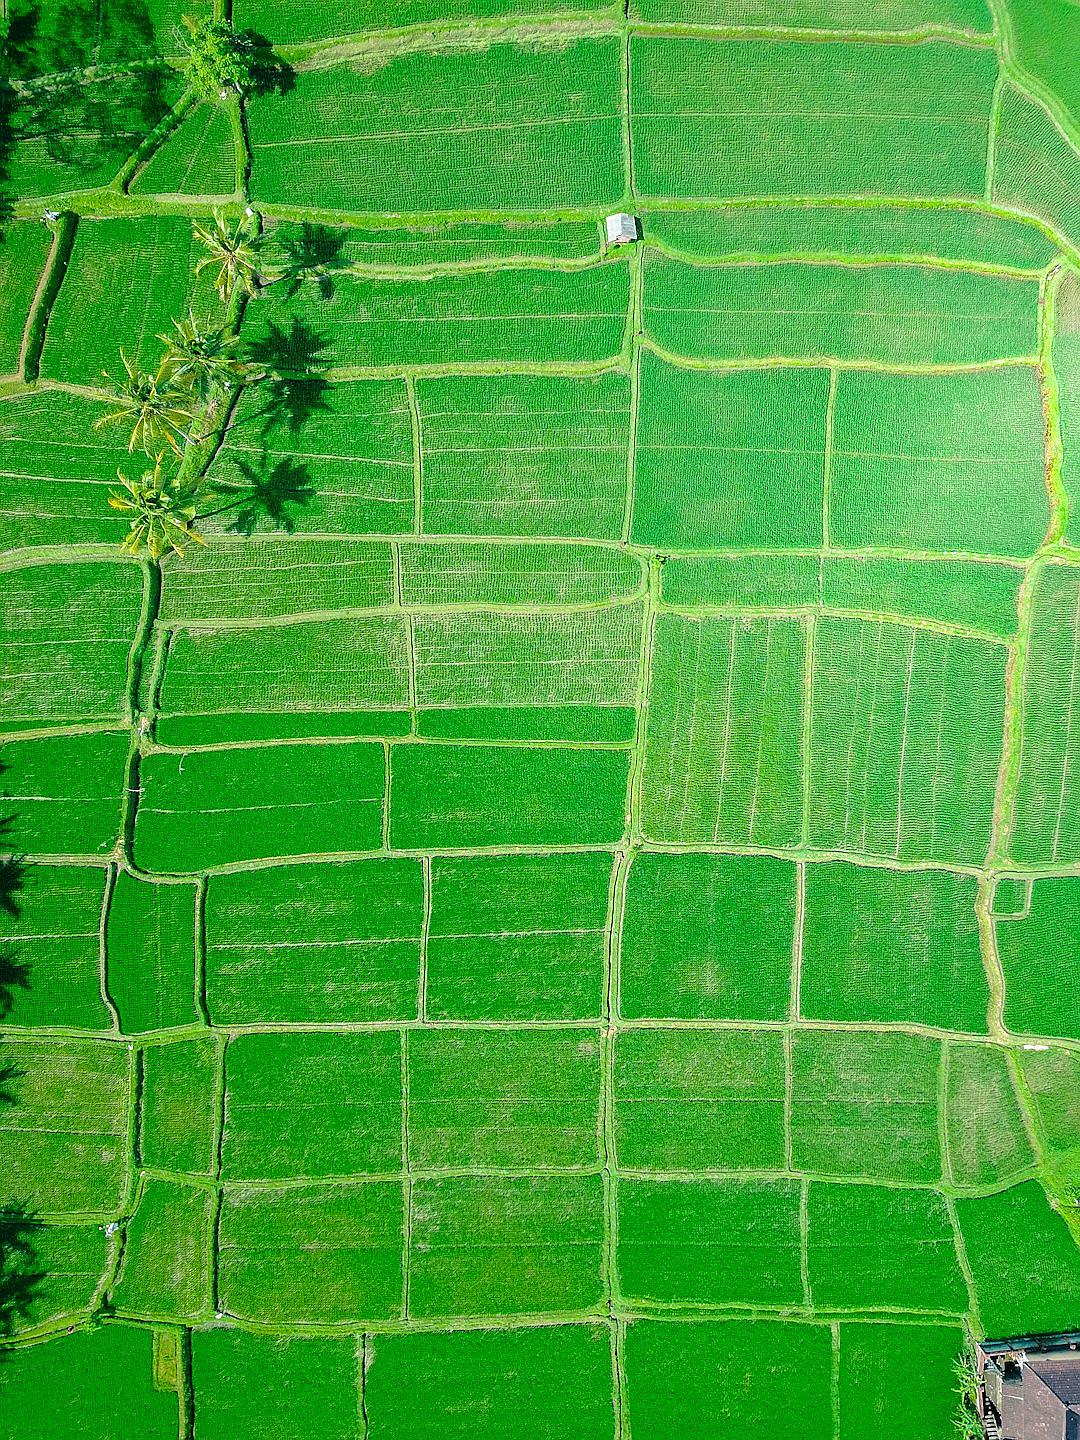 Aerial view of rice fields in Bali, daylight, bright green color, hyper realistic photography in the style of unknown artist.